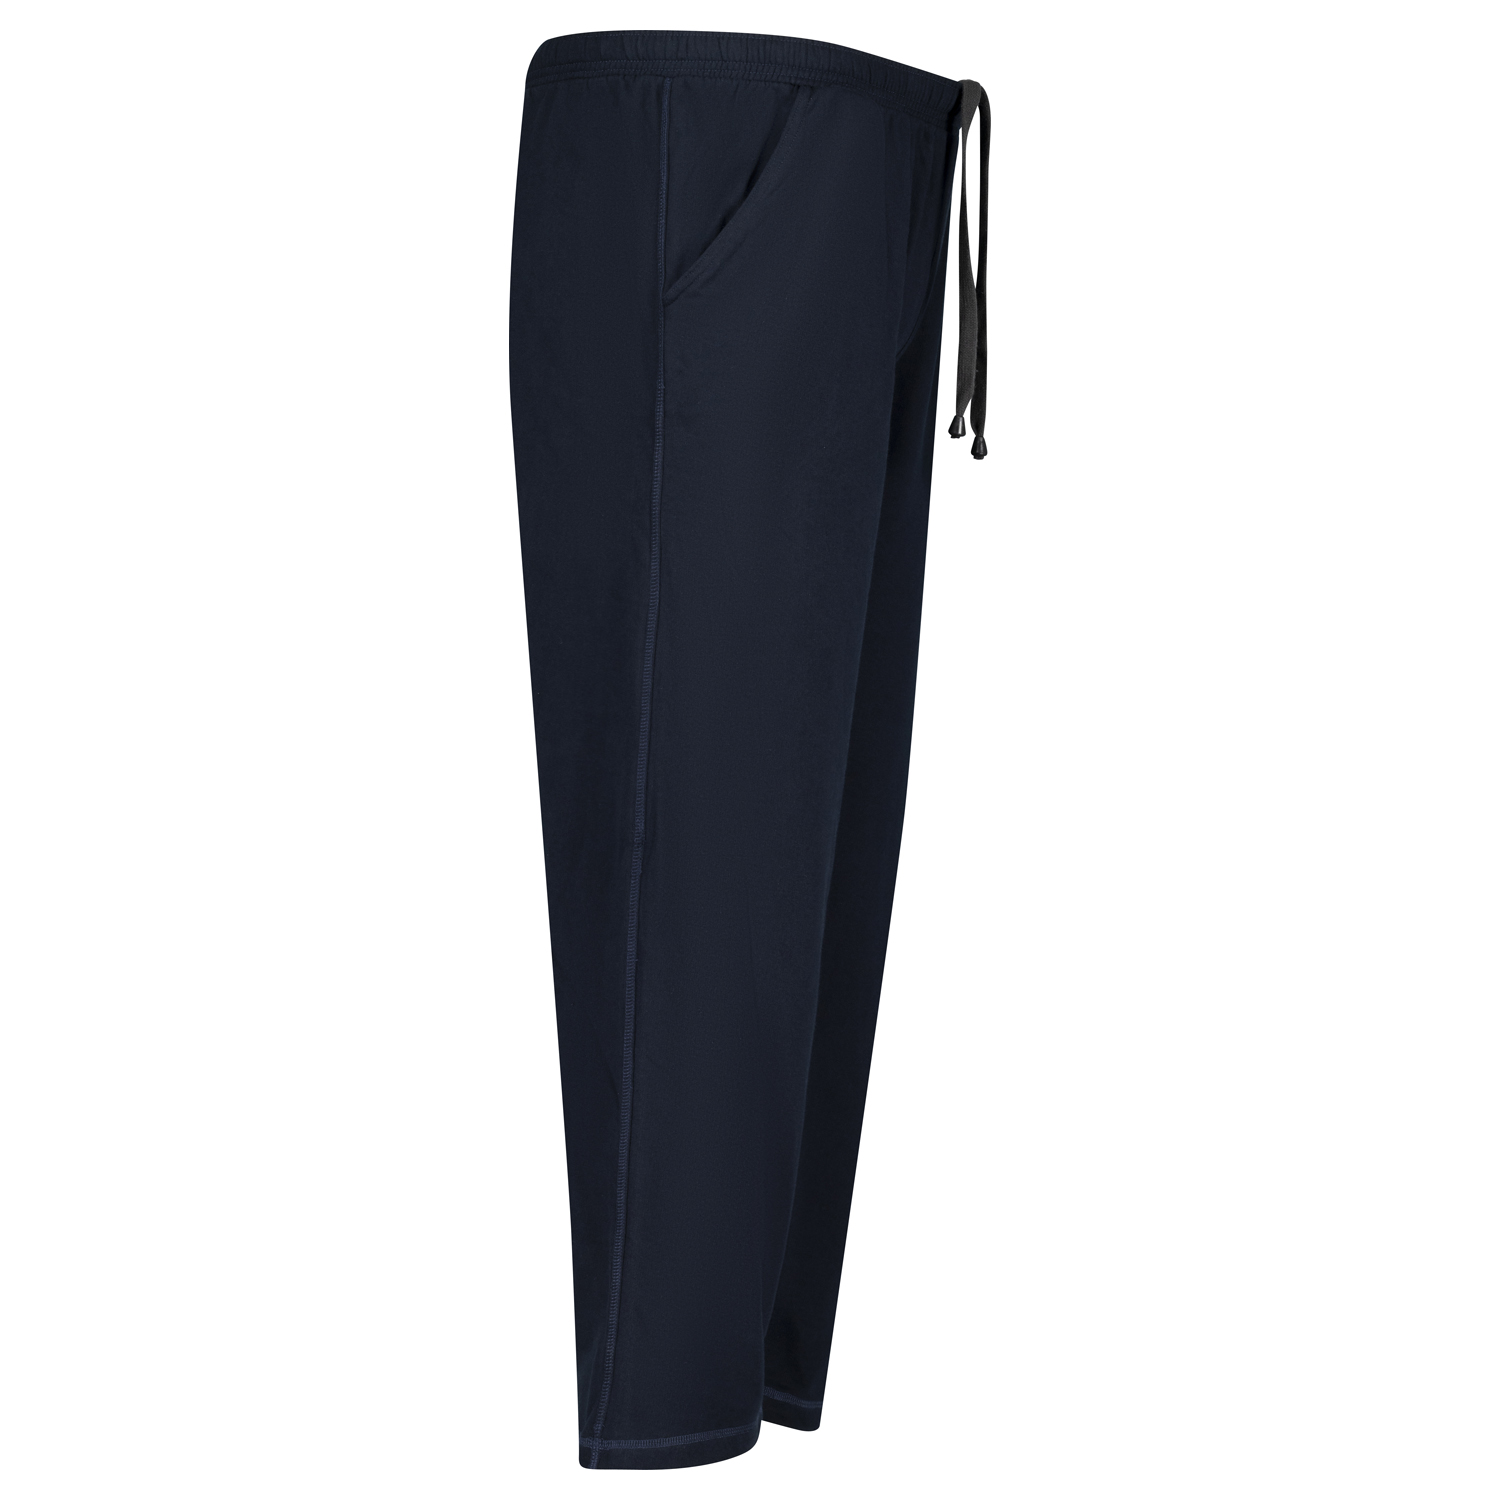 Sweat pants navy by Adamo in plus sizes up to 14XL// 102-122